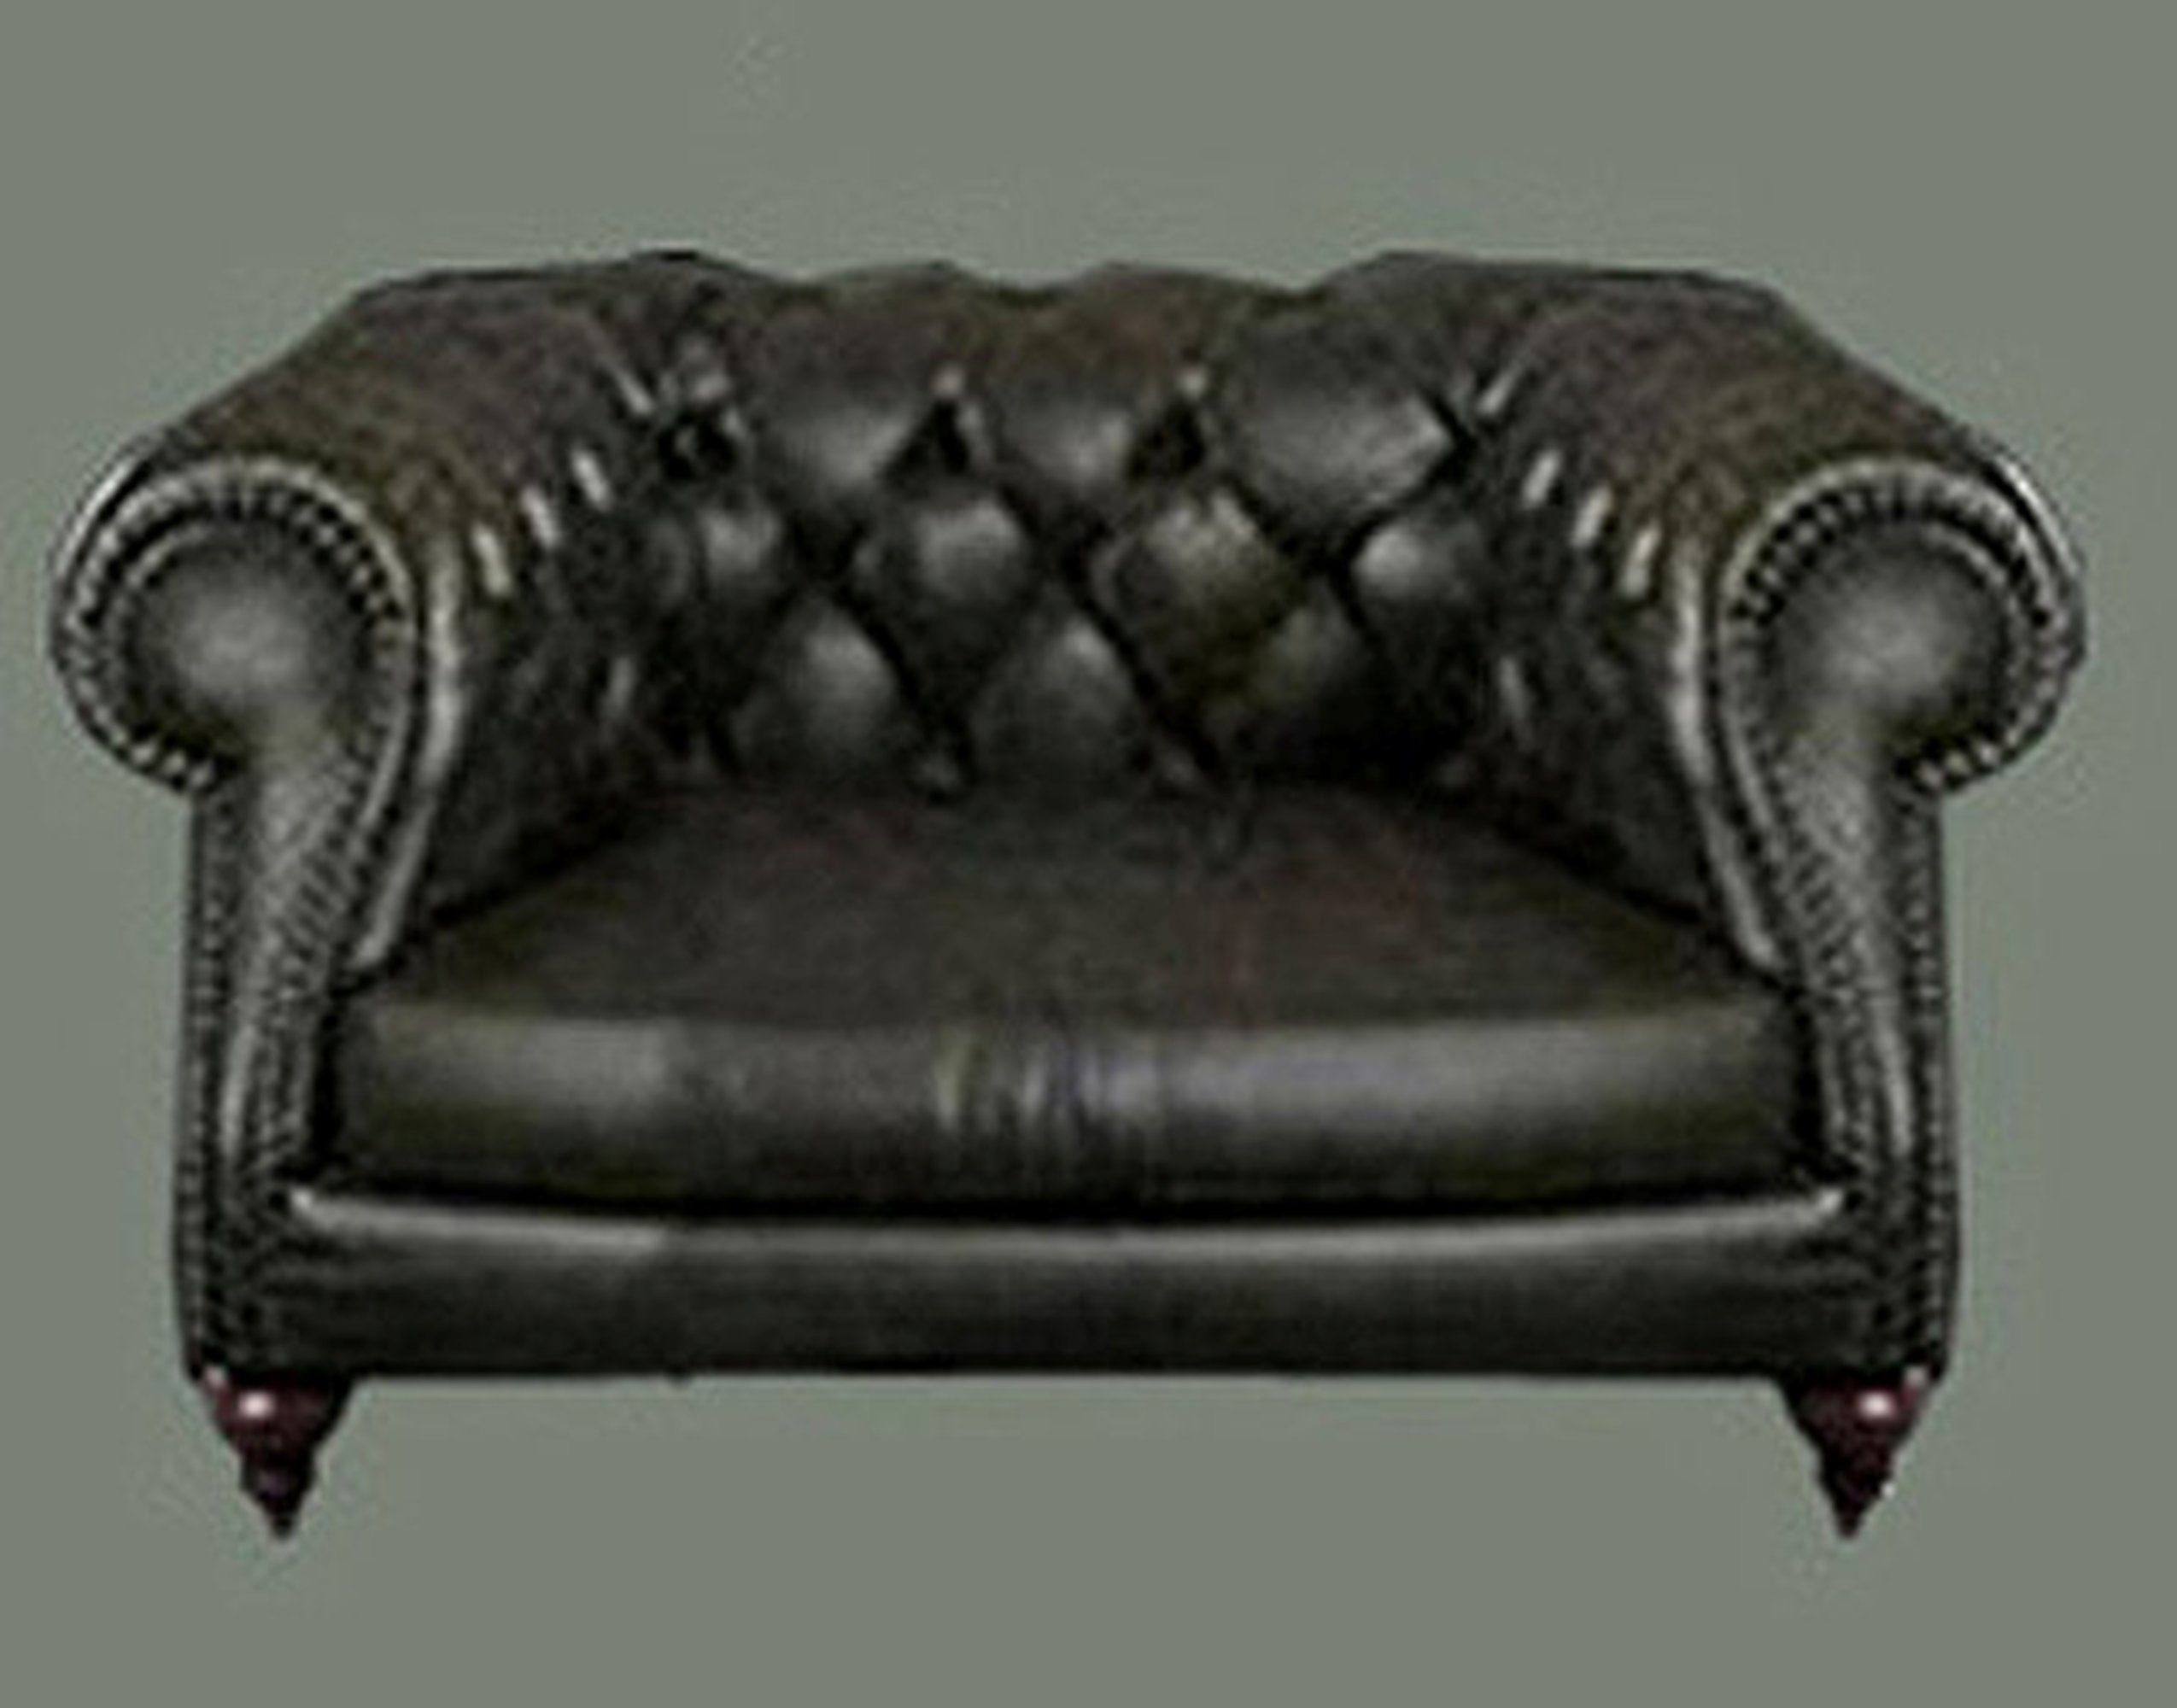 JVmoebel Chesterfield-Sessel Chesterfield Design Sessel Couch Polster Luxus Textil Couch Sofort (Sessel), Made in Europe